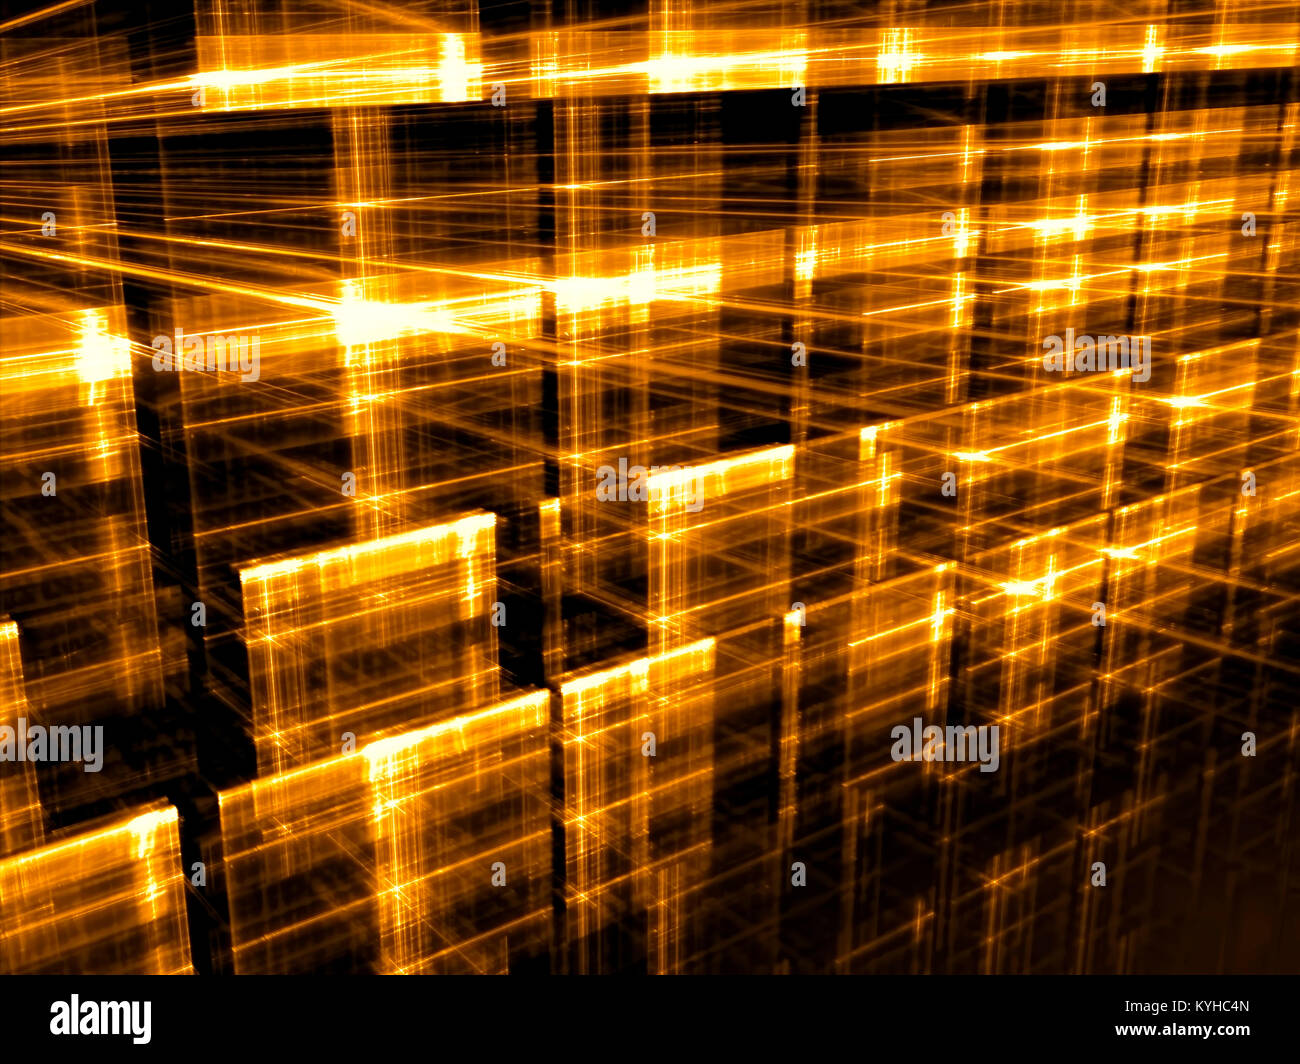 Glowing grid - abstract digitally generated image Stock Photo